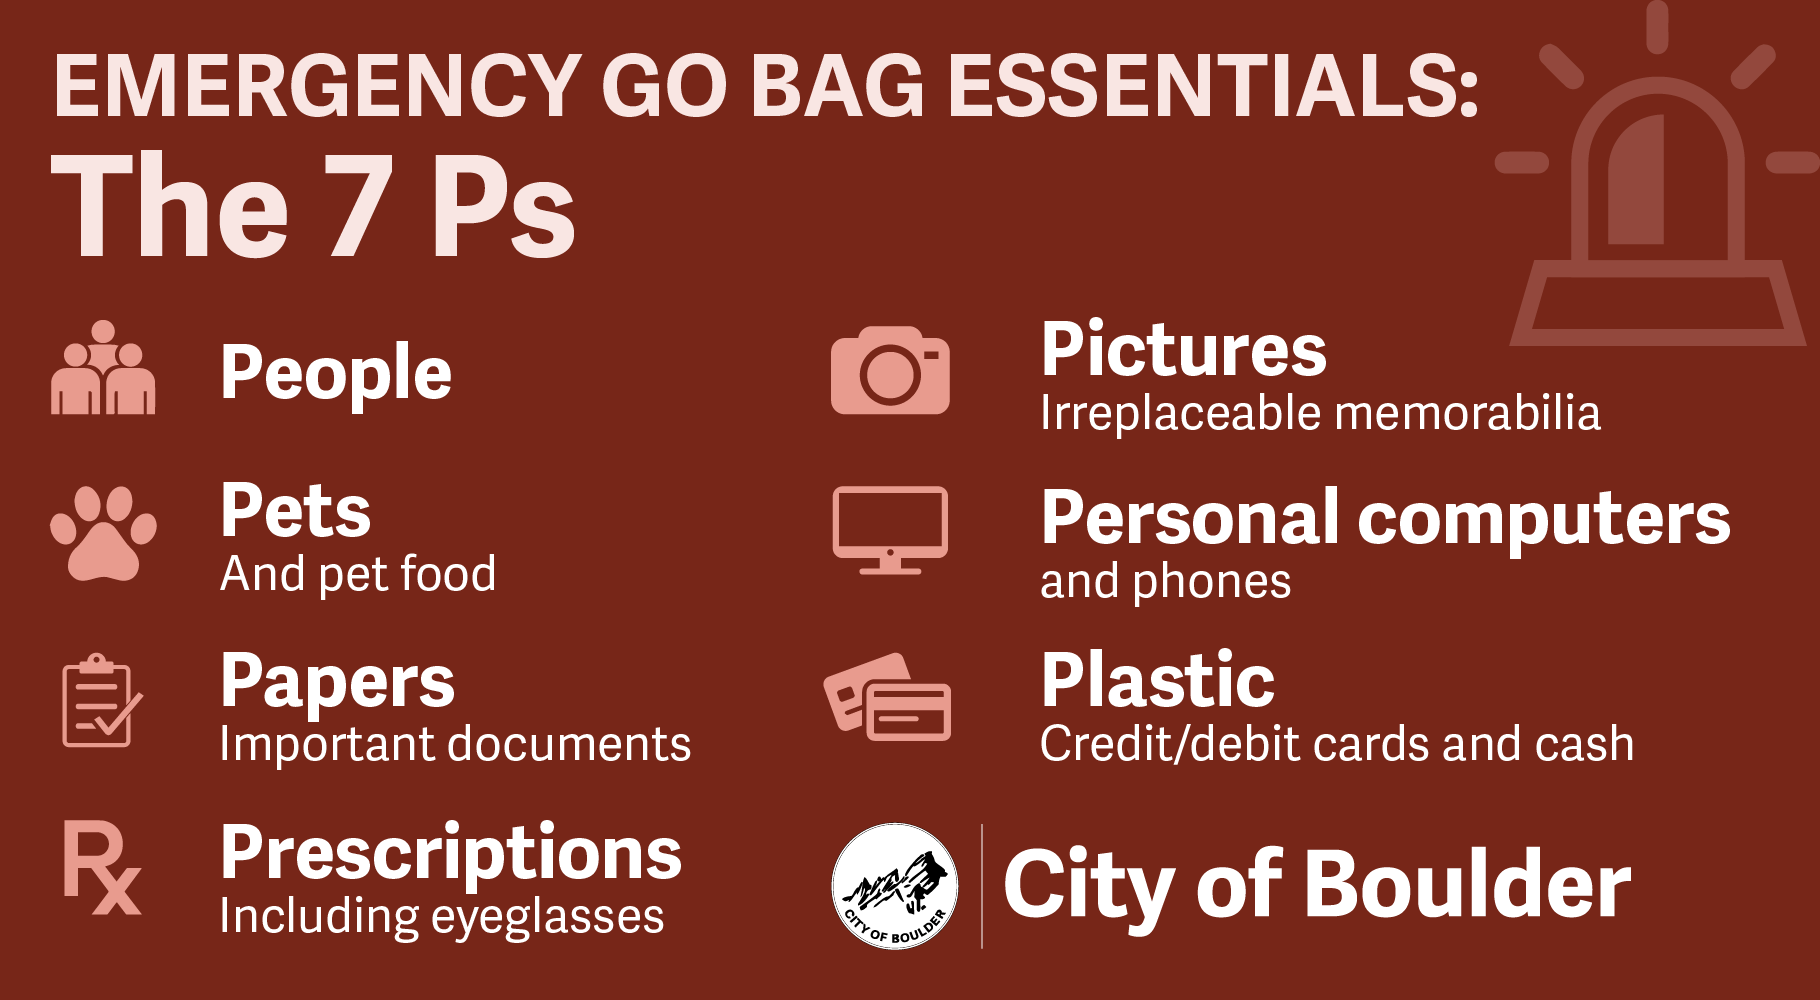 Emergency Go Bag Essentials: People, Pets, Papers, Prescriptions, Pictures, Personal Computers, Plastic Cards and Cash